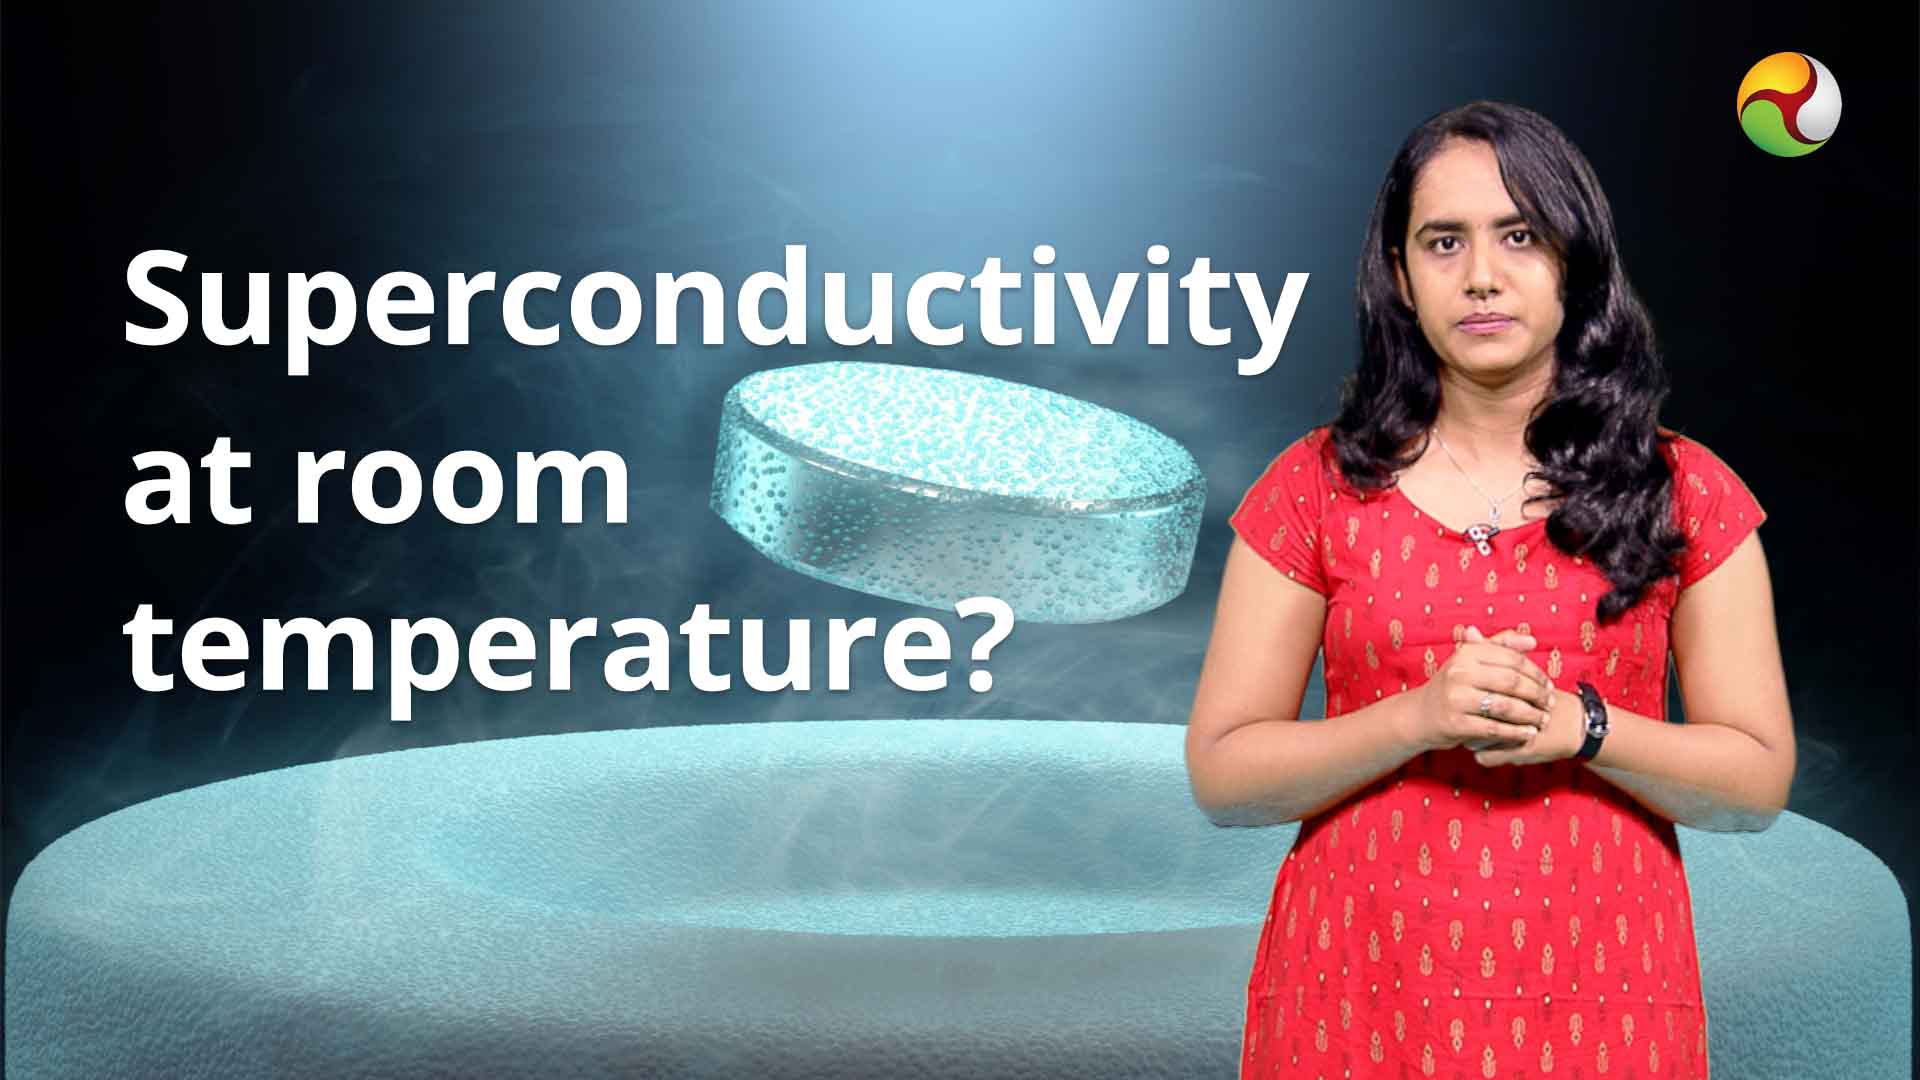 Can scientists achieve superconductivity at room temperature?